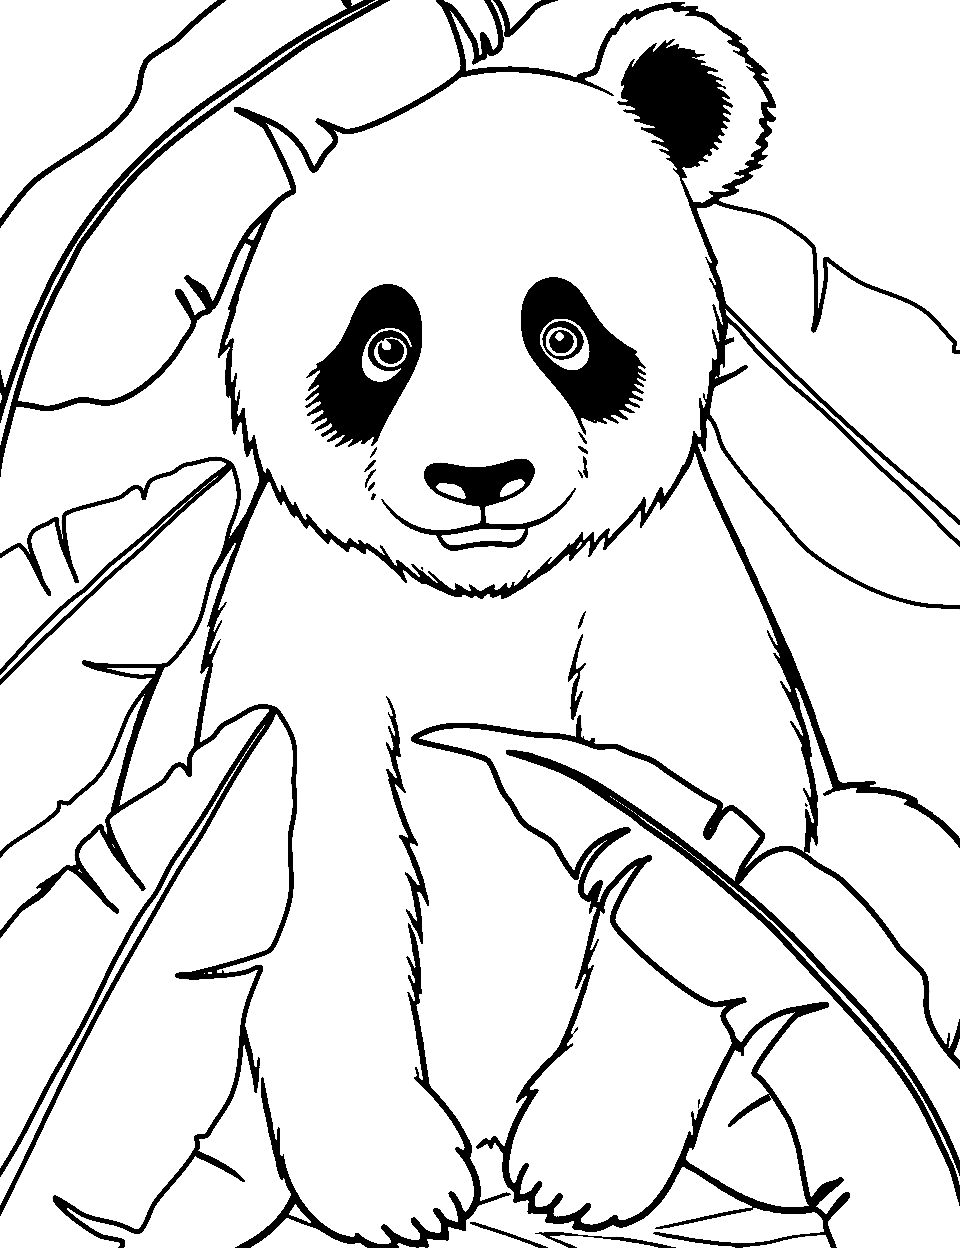 Giant Panda Amidst Leaves Coloring Page - A giant panda gently navigating through a calm and leafy environment.